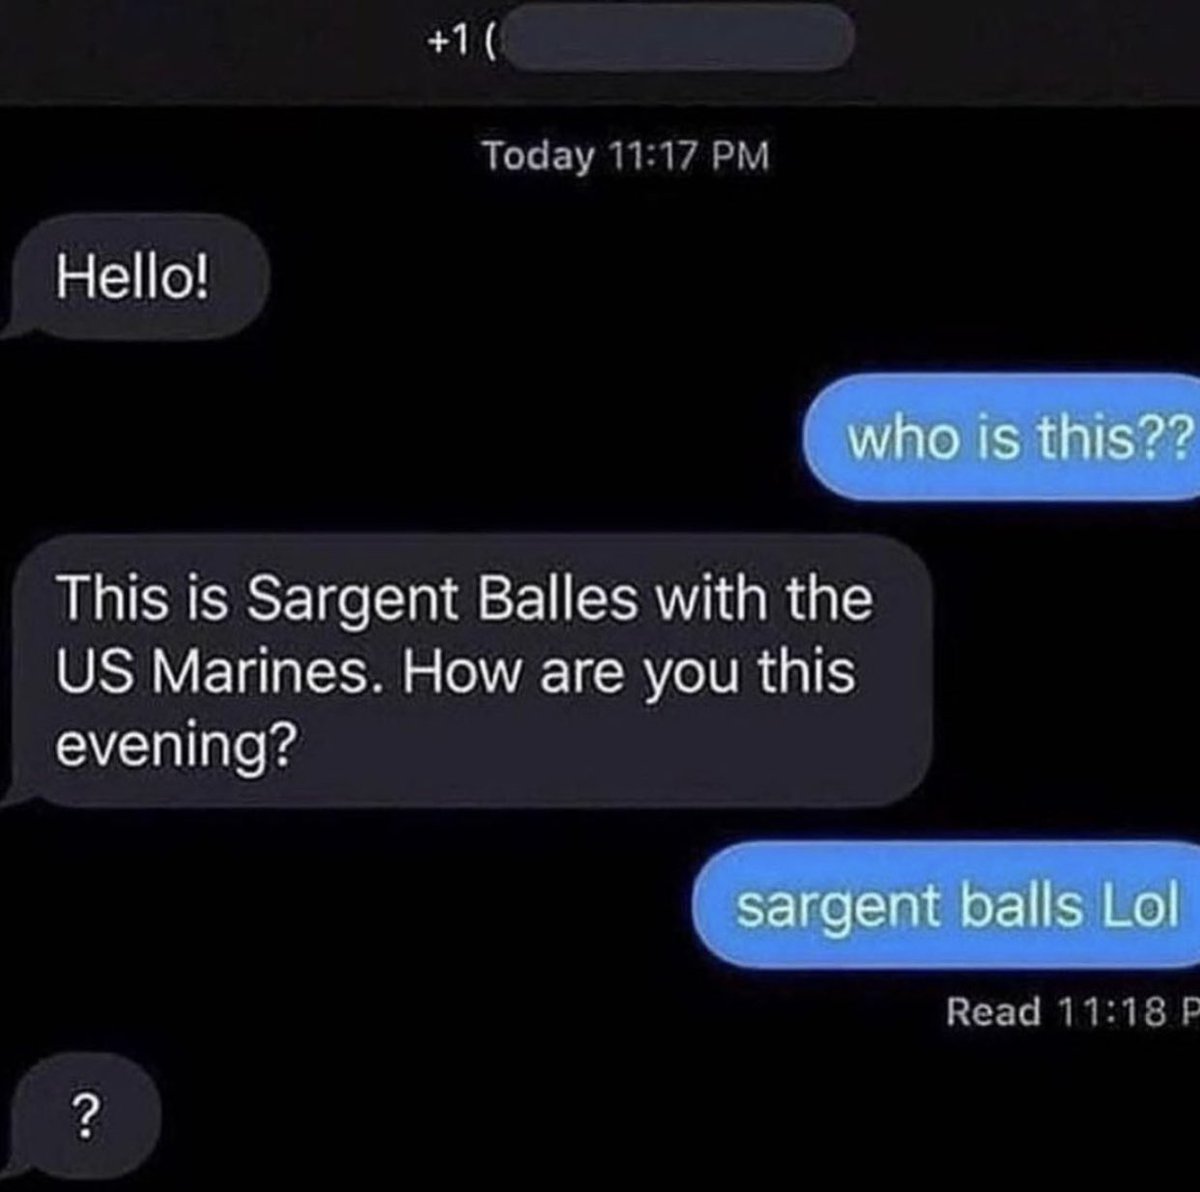 suspicious dms from twitter - multimedia - Hello! 1 ? Today who is this?? This is Sargent Balles with the Us Marines. How are you this evening? sargent balls Lol Read P